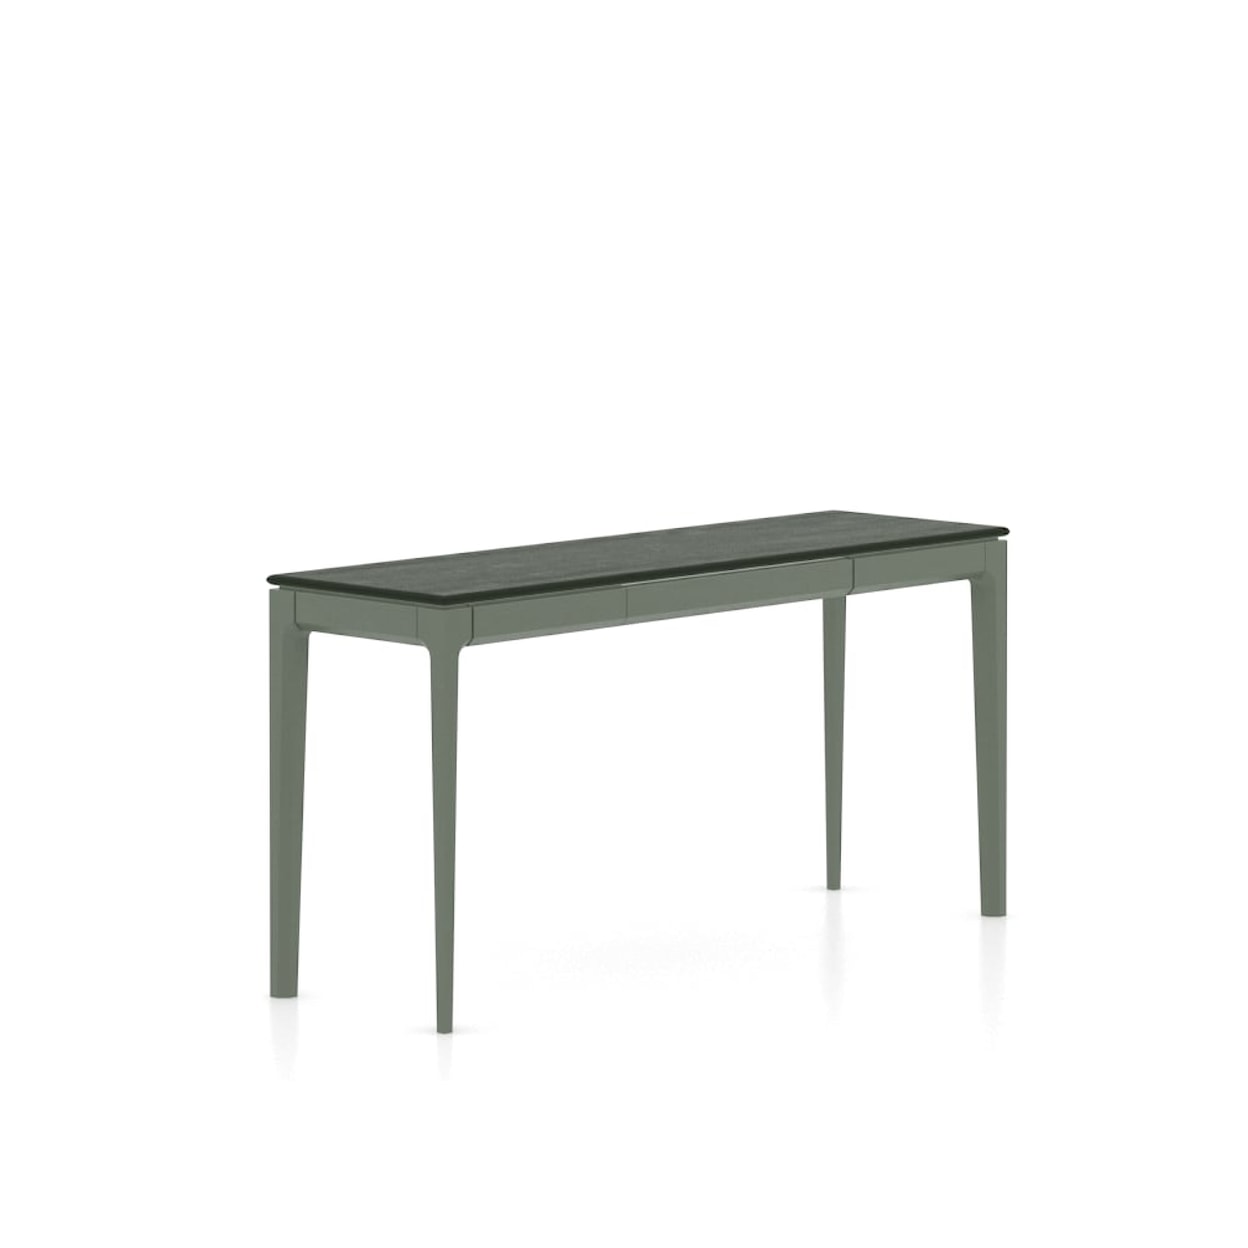 Canadel Accent Essence Console Table